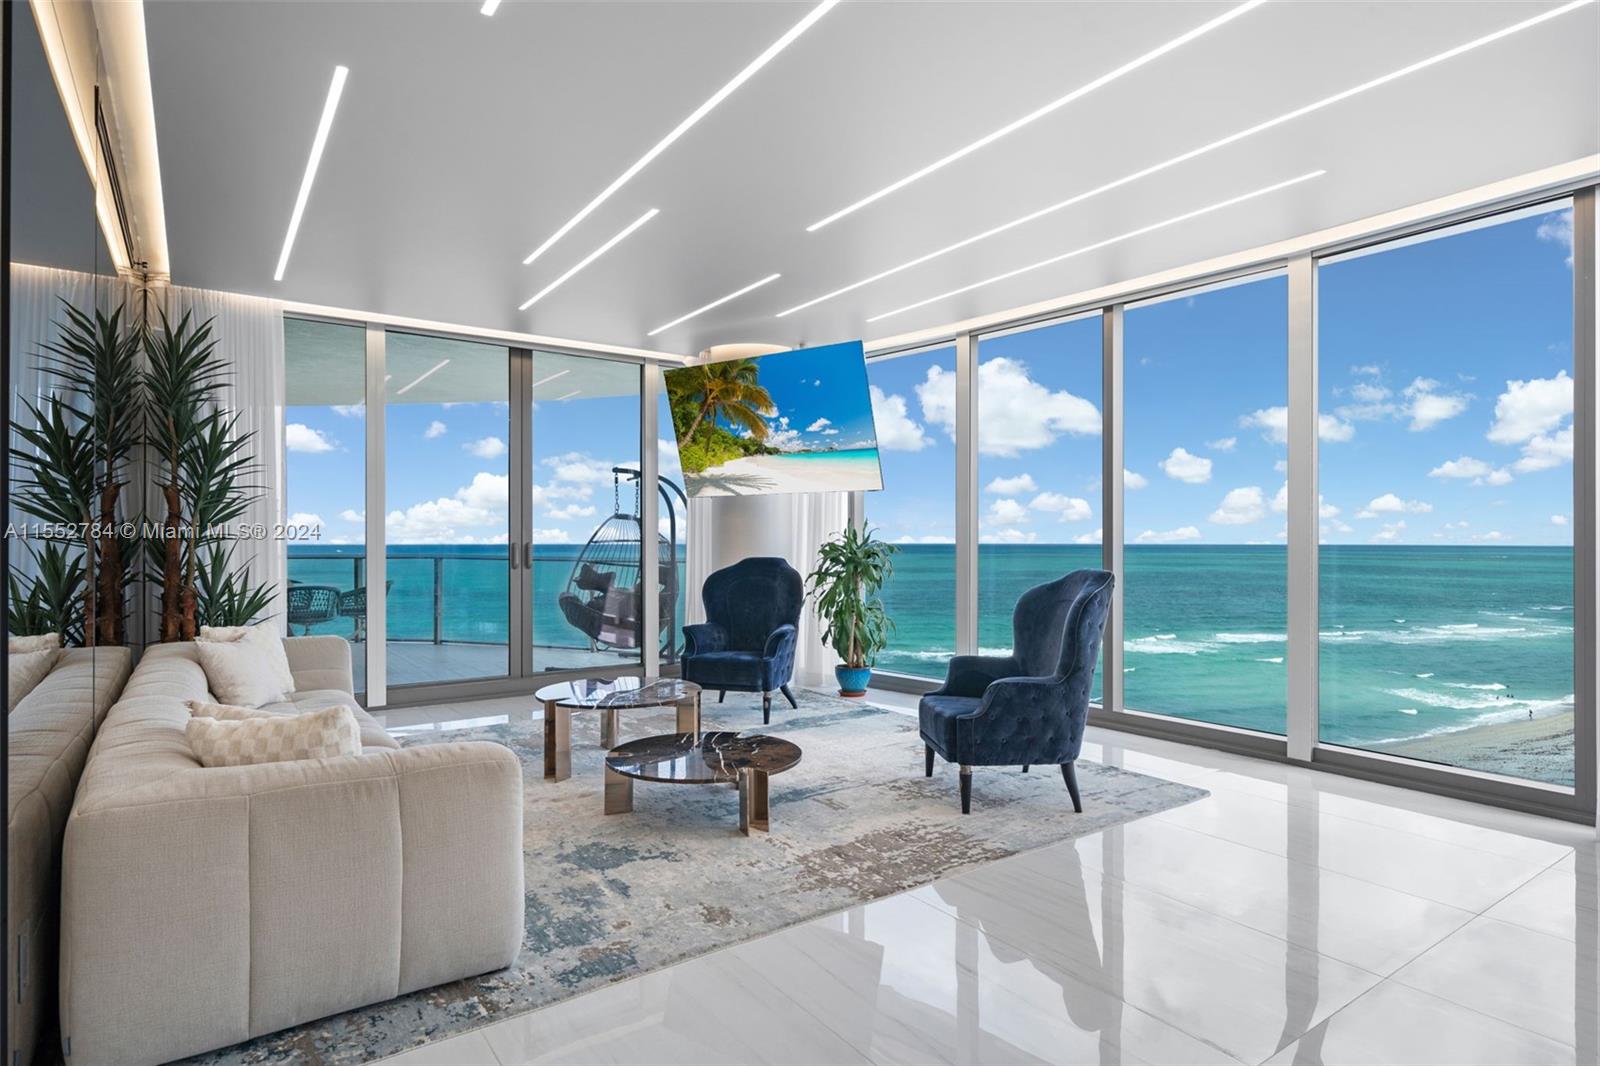 15701 Collins Ave 905, Sunny Isles Beach, Florida 33160, 4 Bedrooms Bedrooms, ,5 BathroomsBathrooms,Residential,For Sale,15701 Collins Ave 905,A11552784